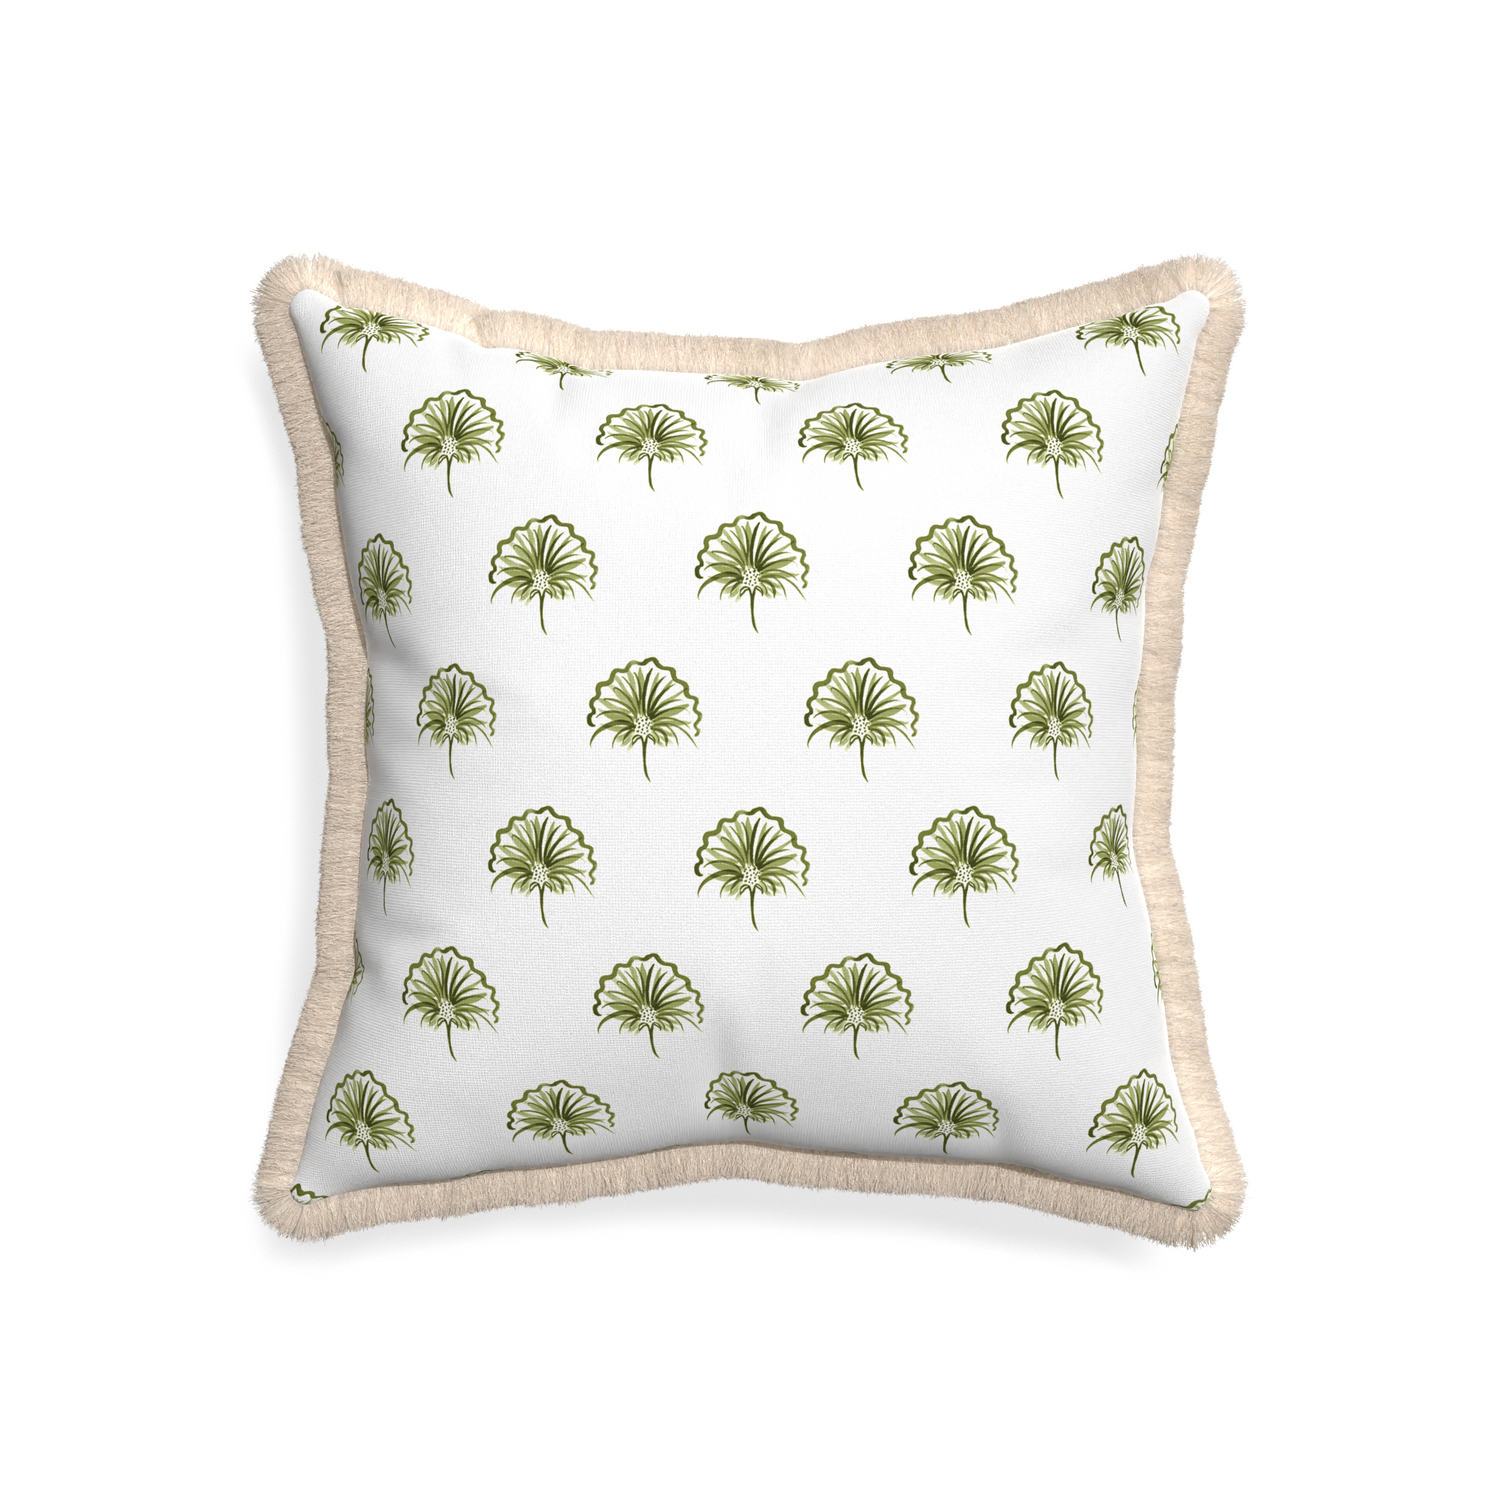 20-square penelope moss custom green floralpillow with cream fringe on white background